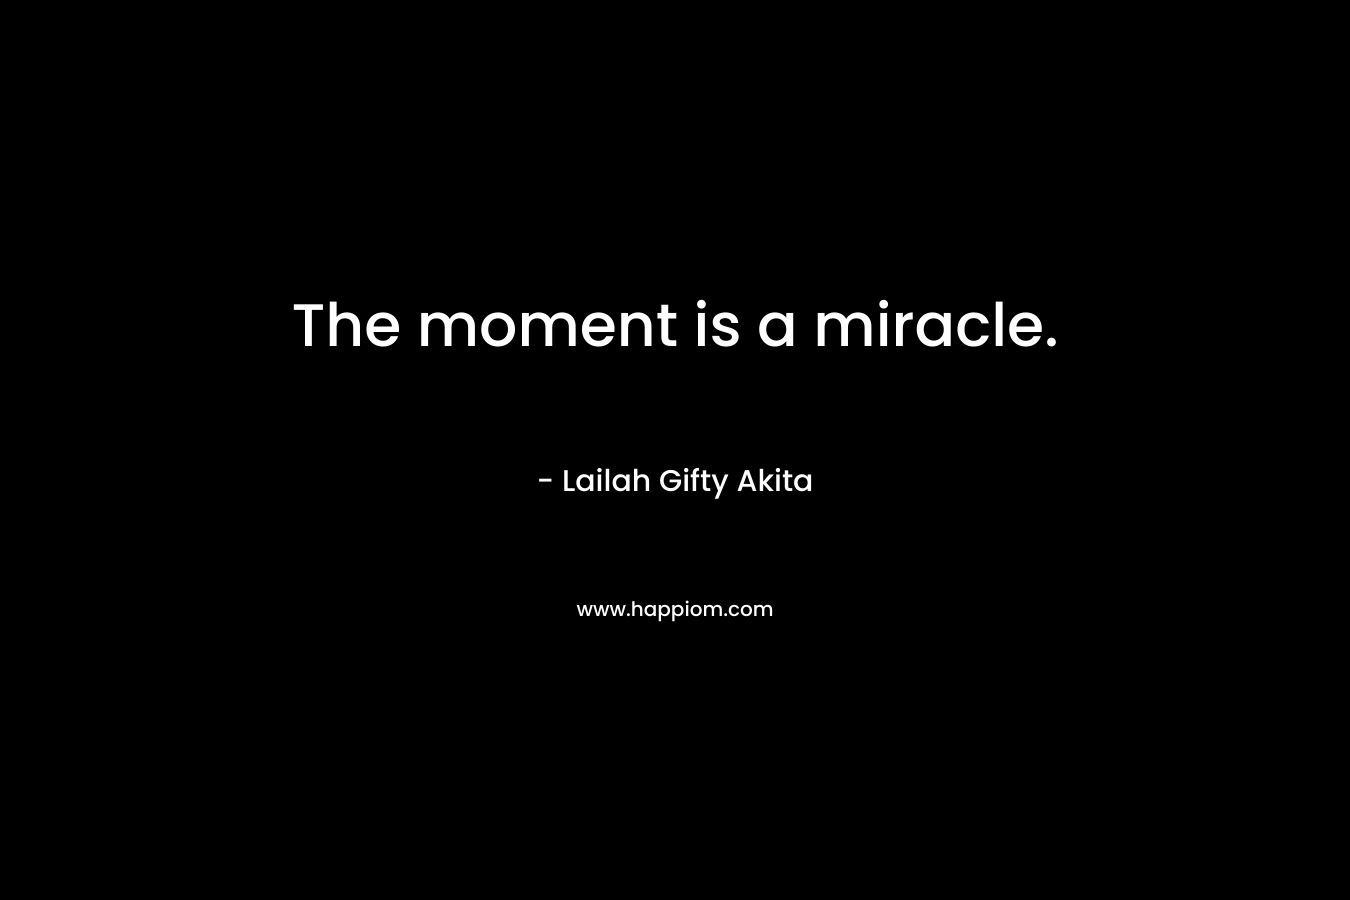 The moment is a miracle.